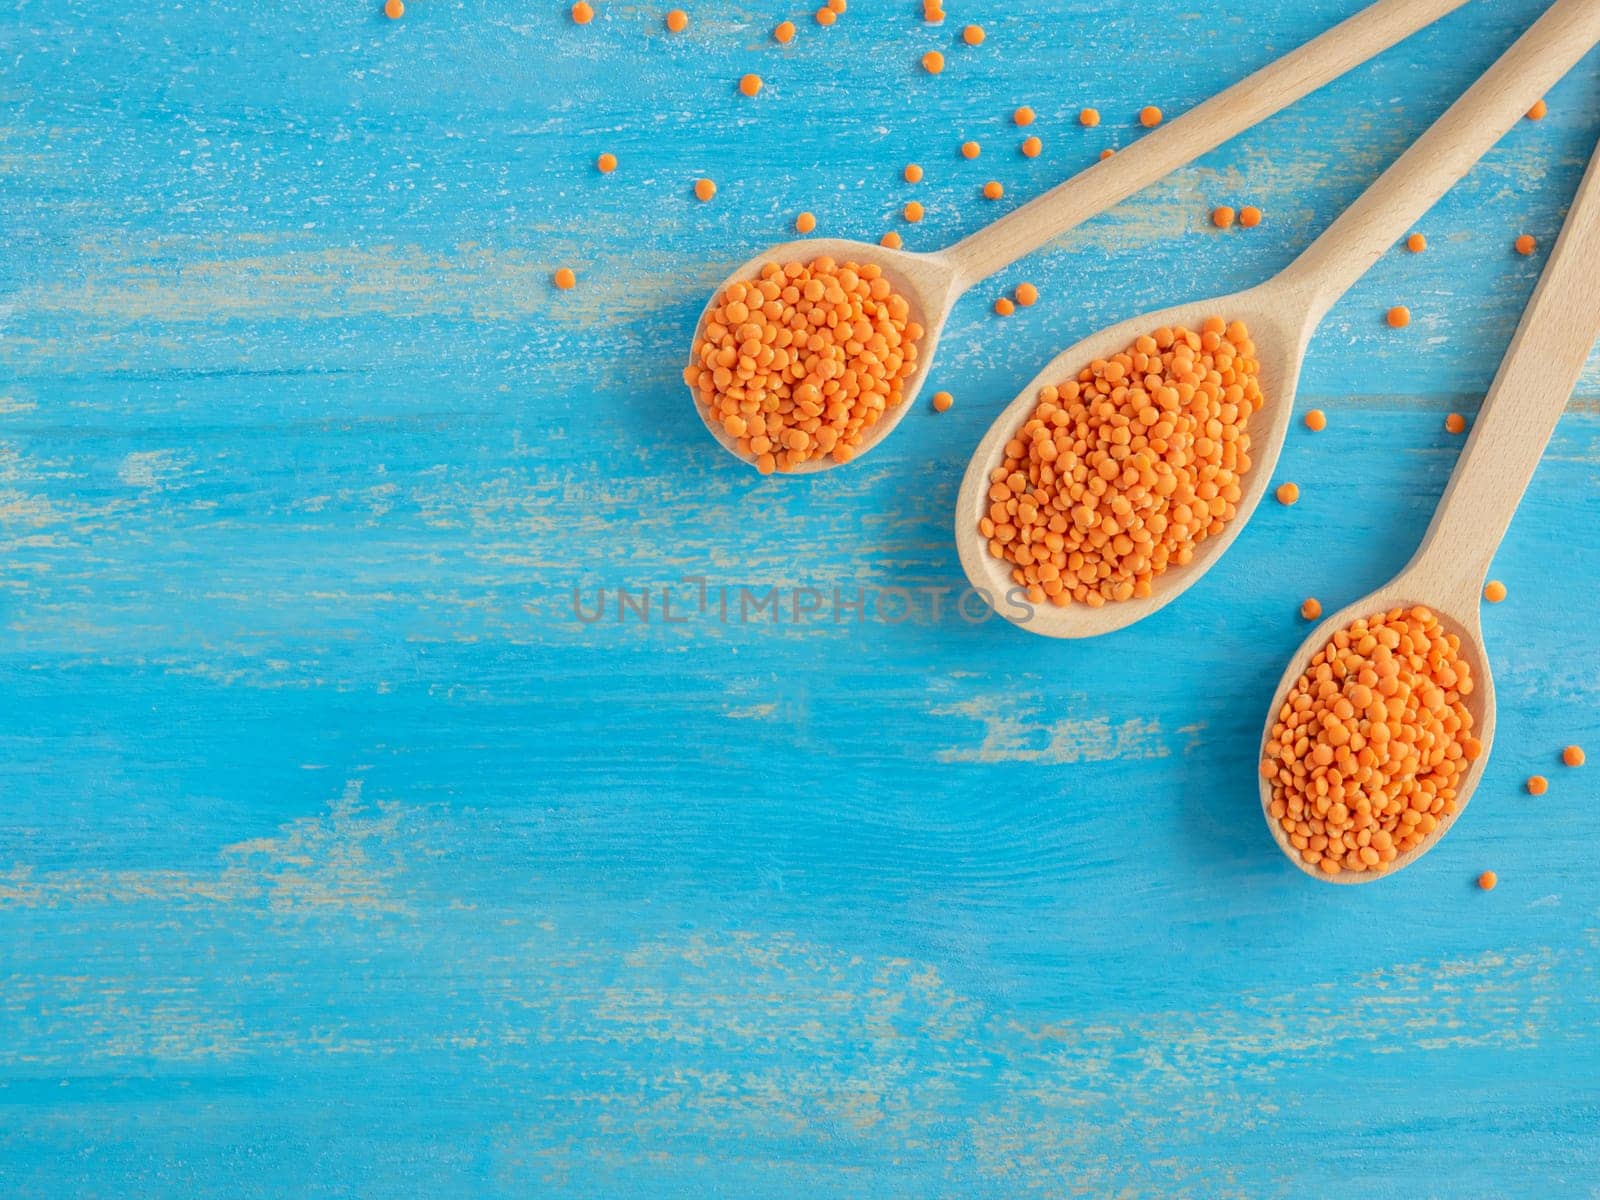 Colorful and stylish composition. Three wooden spoons with Red Lentils or Masoor Dal on light blue background. Flat lay. Vegetarian super food. Healthy eating and dietary. Canadian Orange Lentil